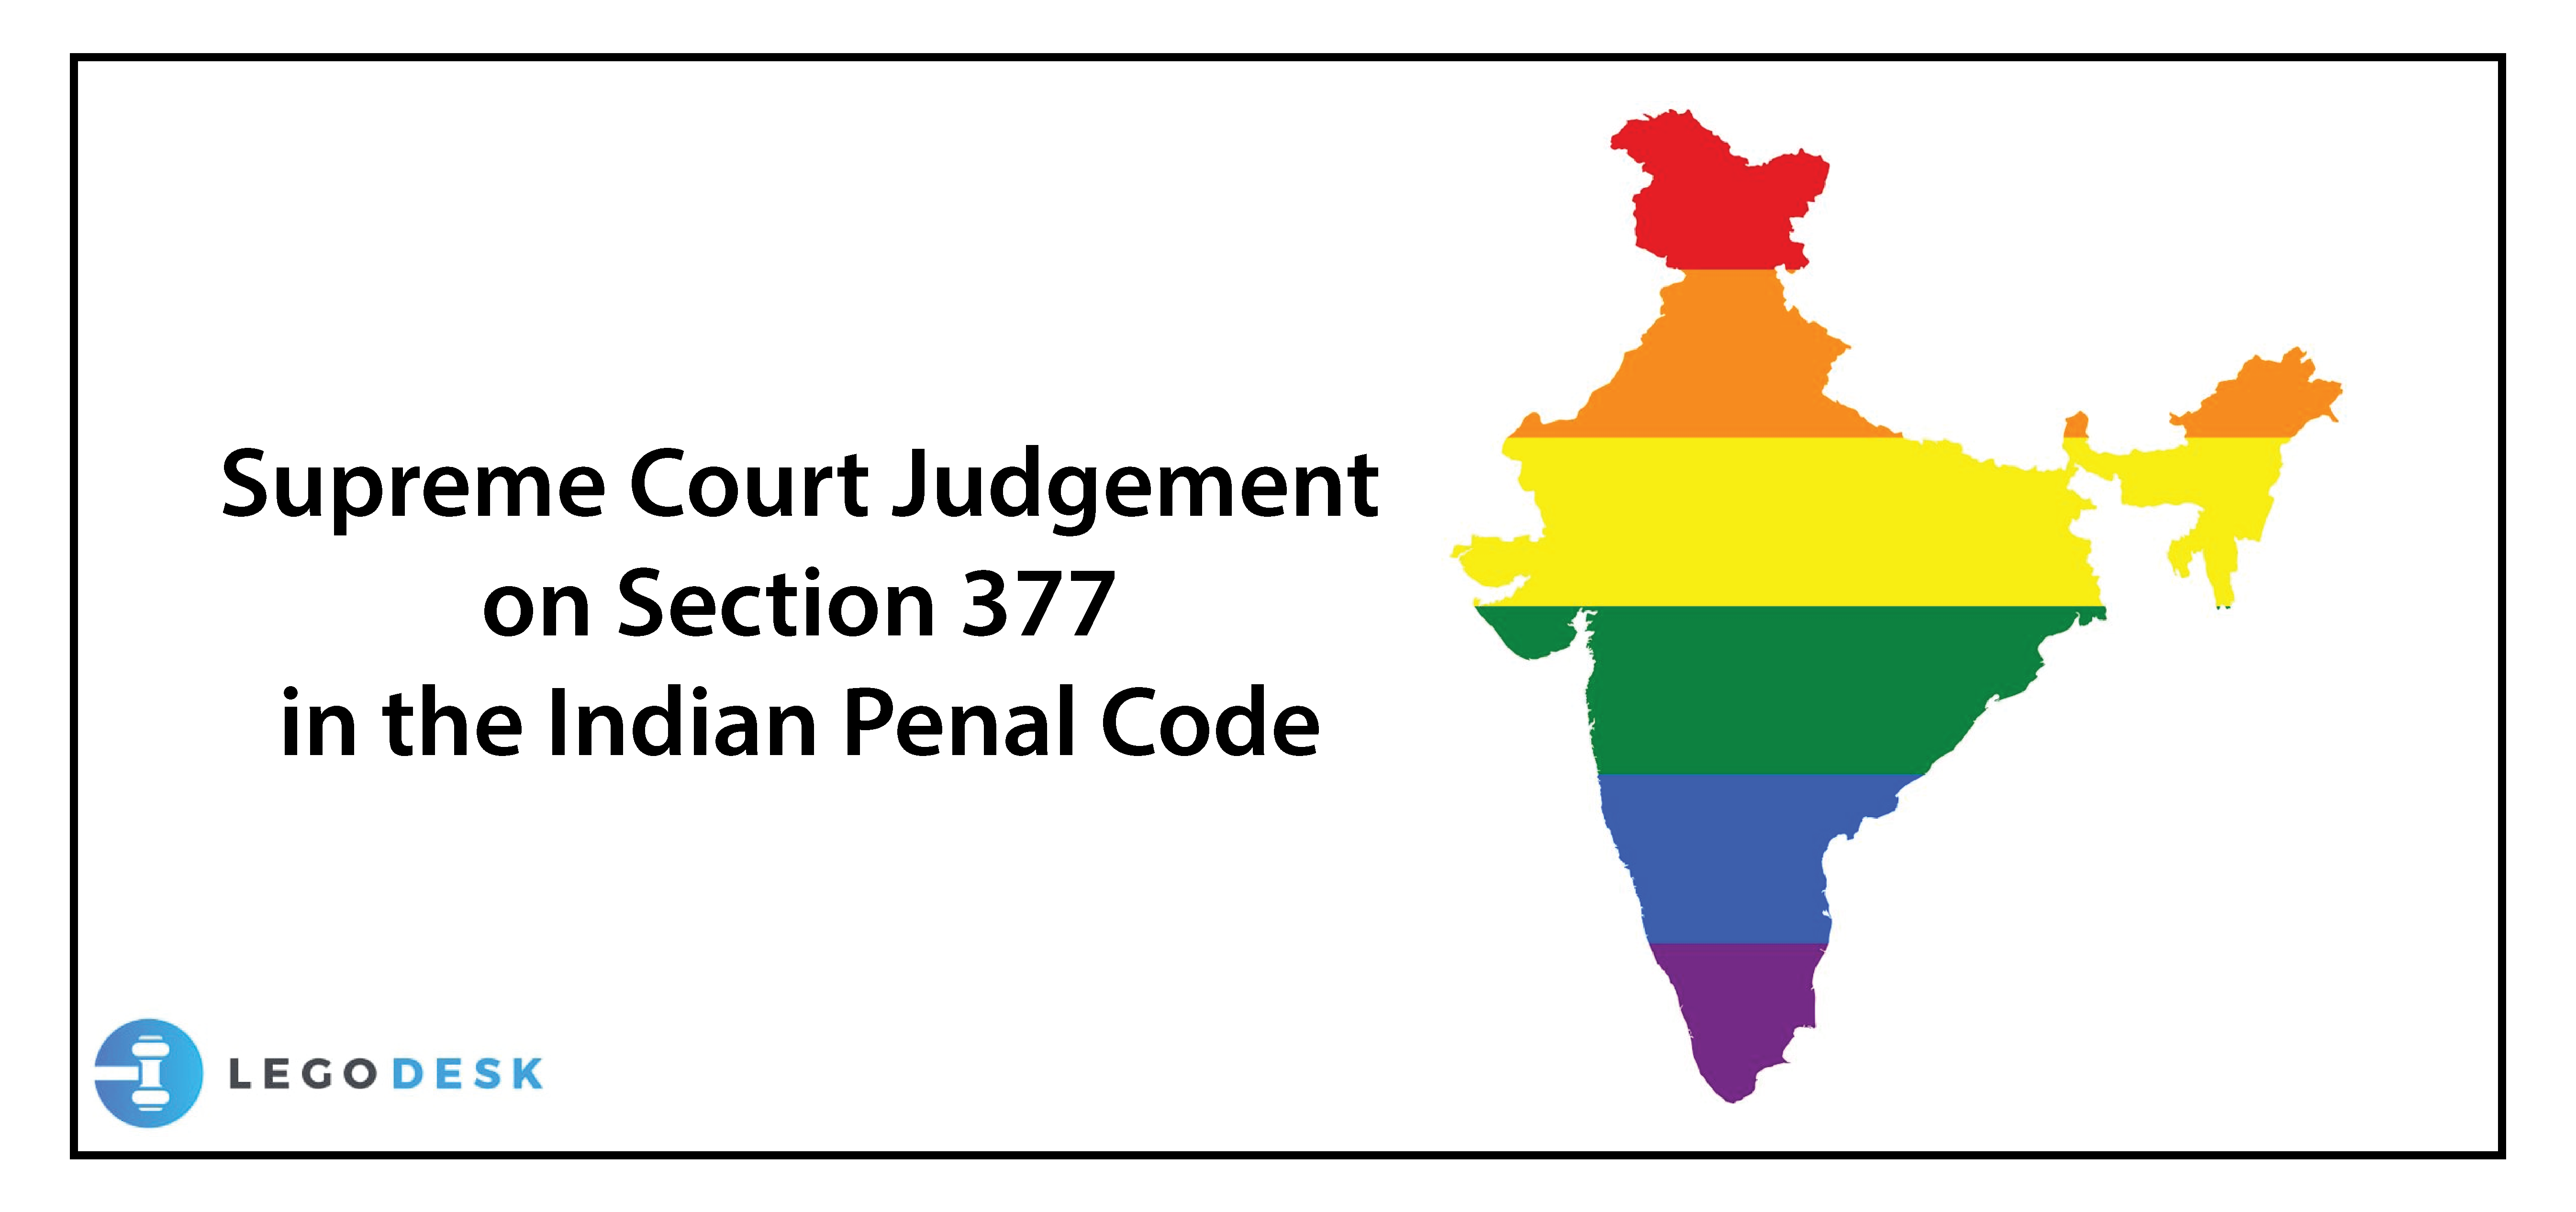 Latest Judgement by Supreme Court on IPC Section 377